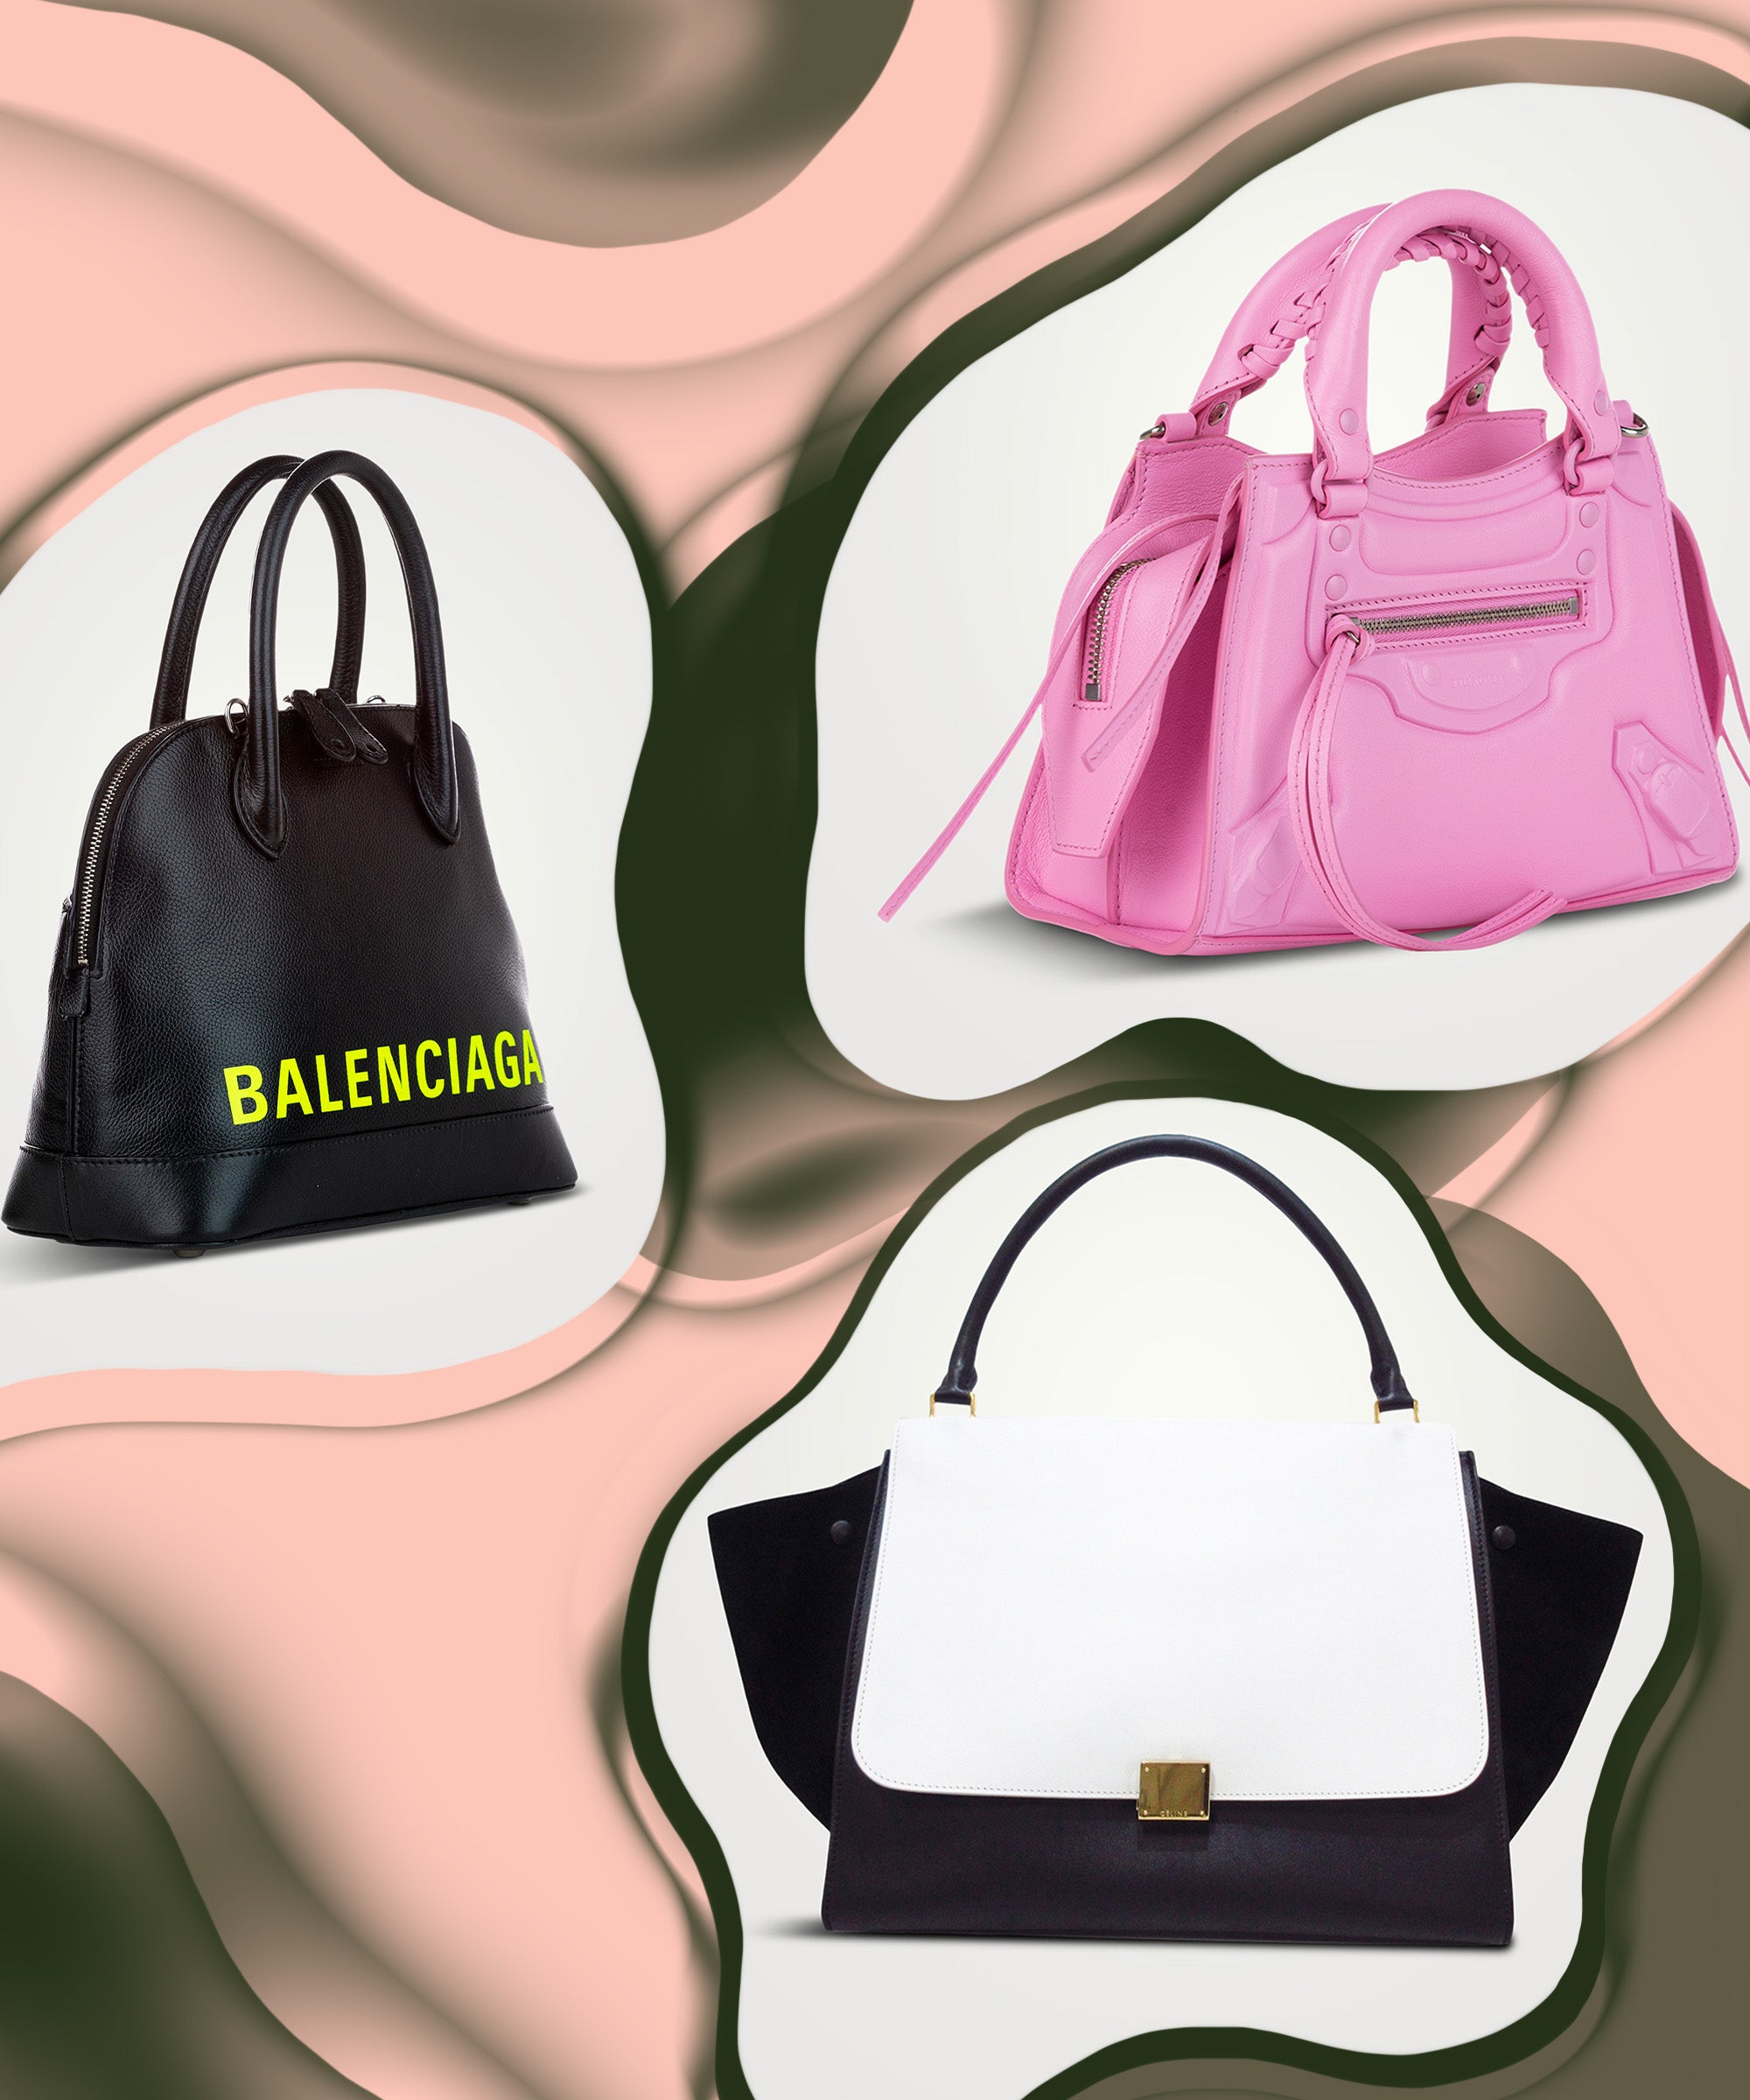 Balenciaga Fall 2011 bags available online  Spotted Fashion